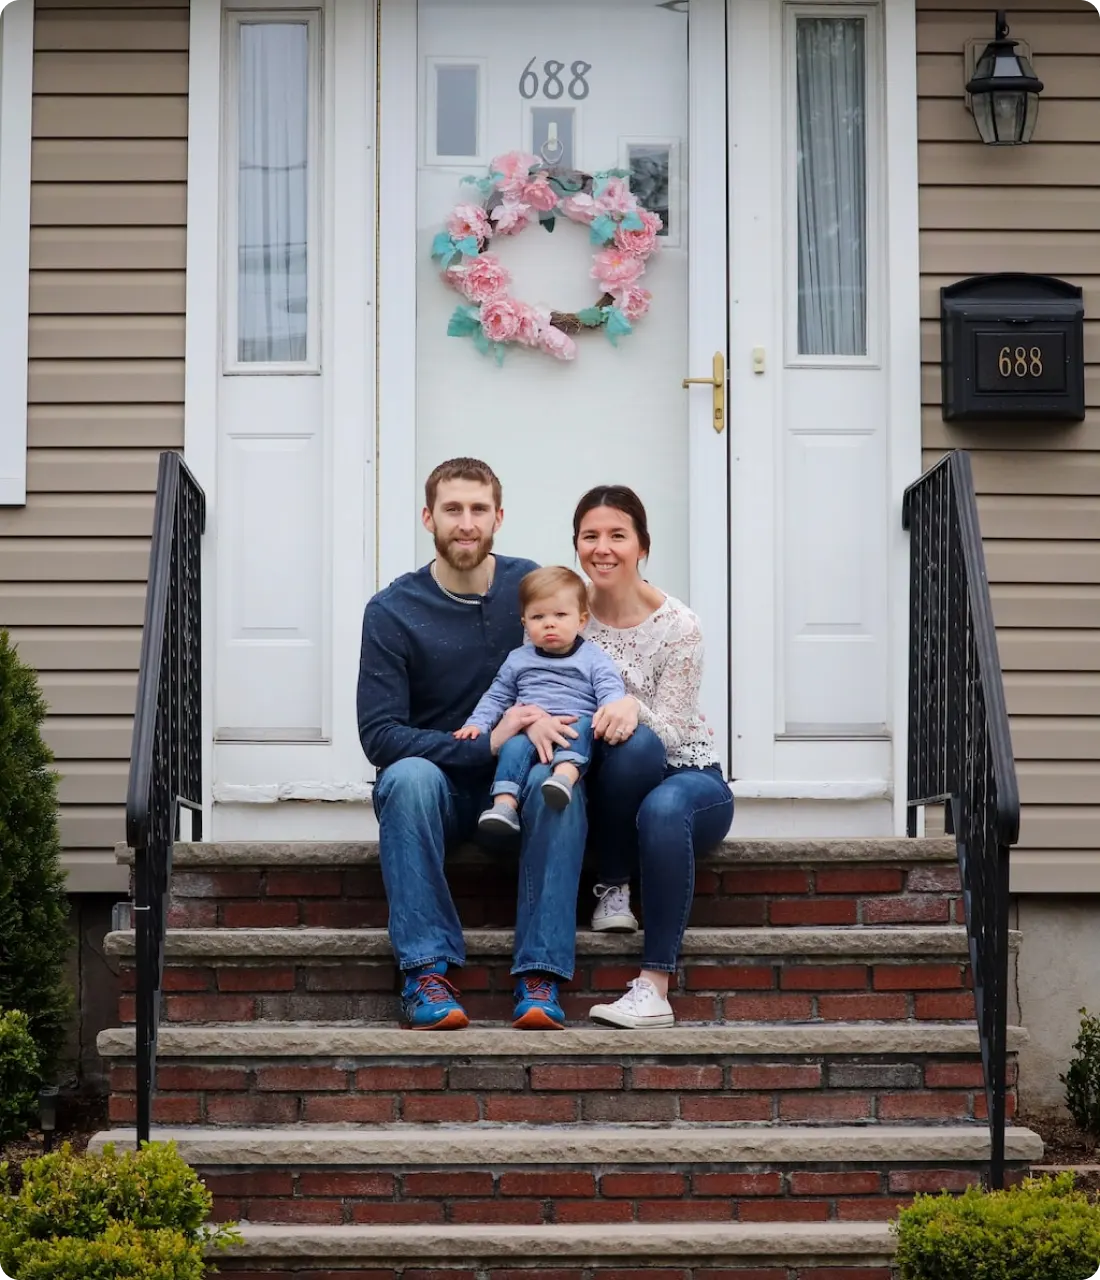 An image of a couple with their son sitting on a stair in front the main door of their house.